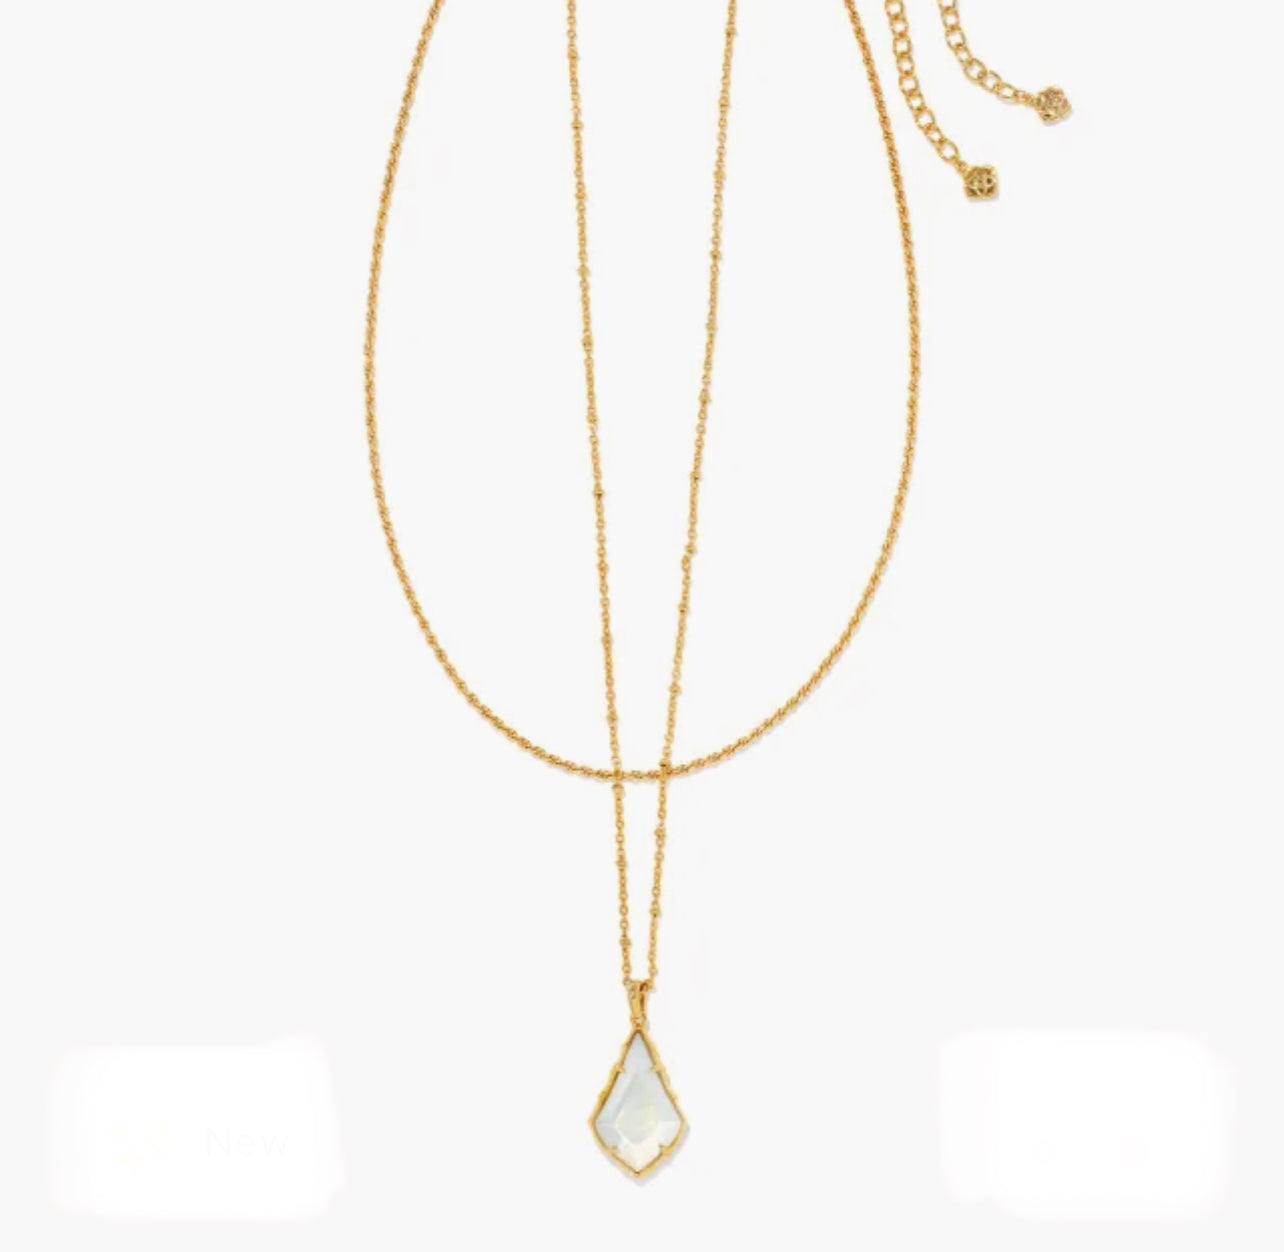 Kendra Scott-Faceted Alex Gold Convertible Necklace in Ivory llusion 9608802916